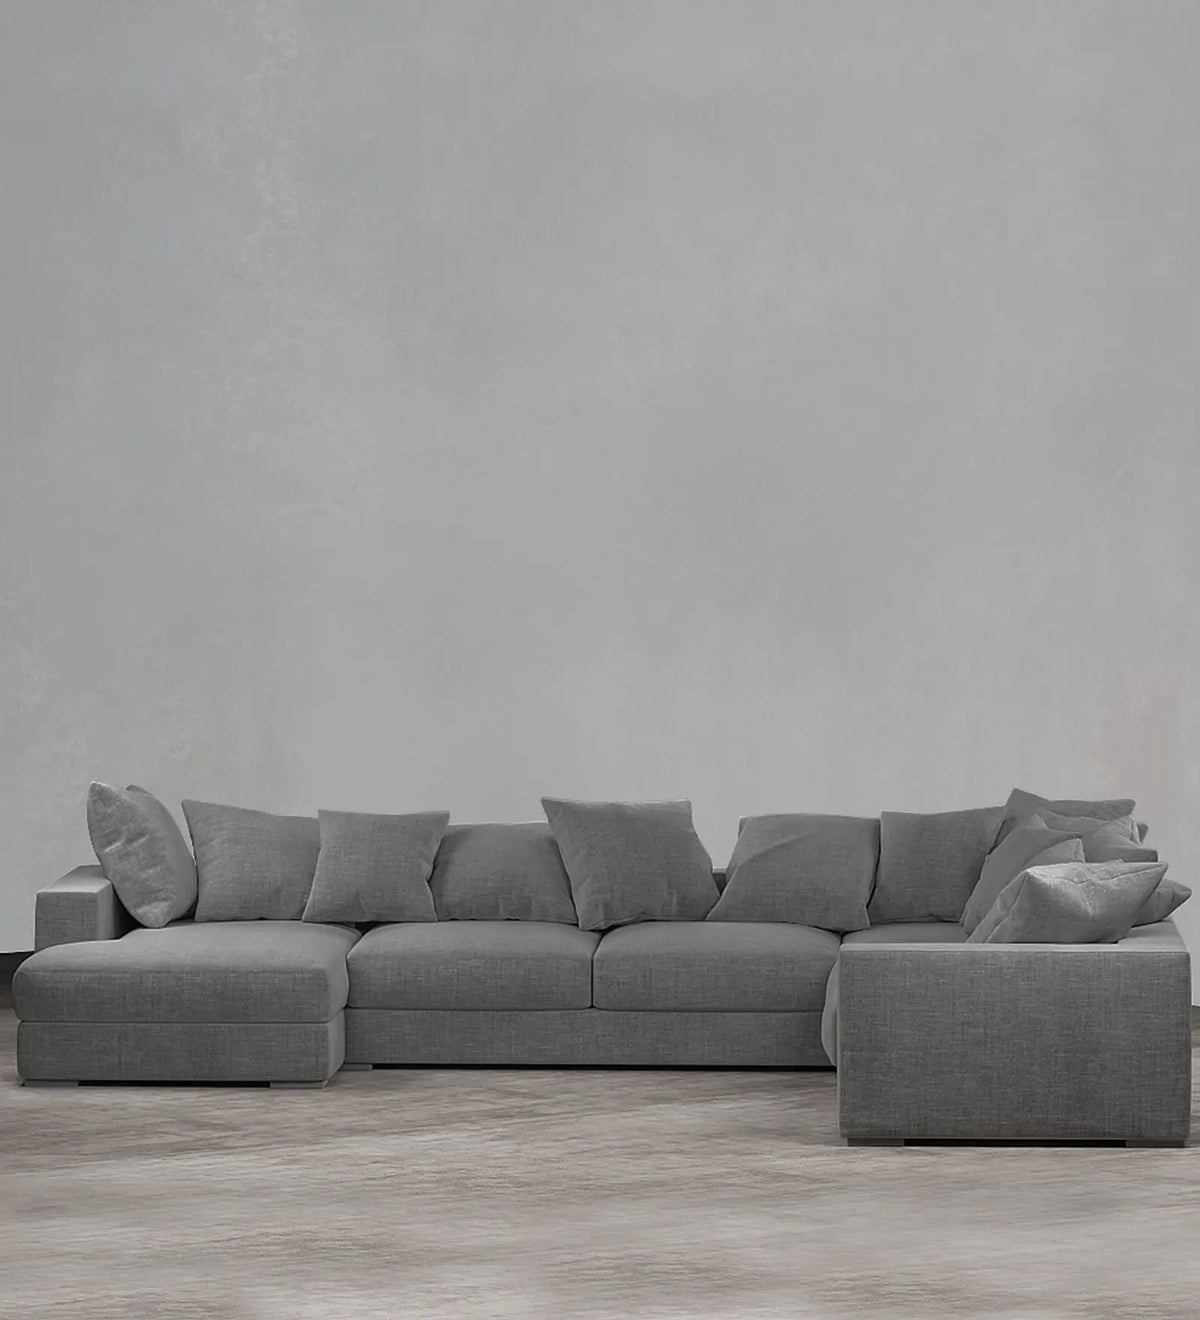 Striado Upholstered Sofa With Chaise Sectional sofas